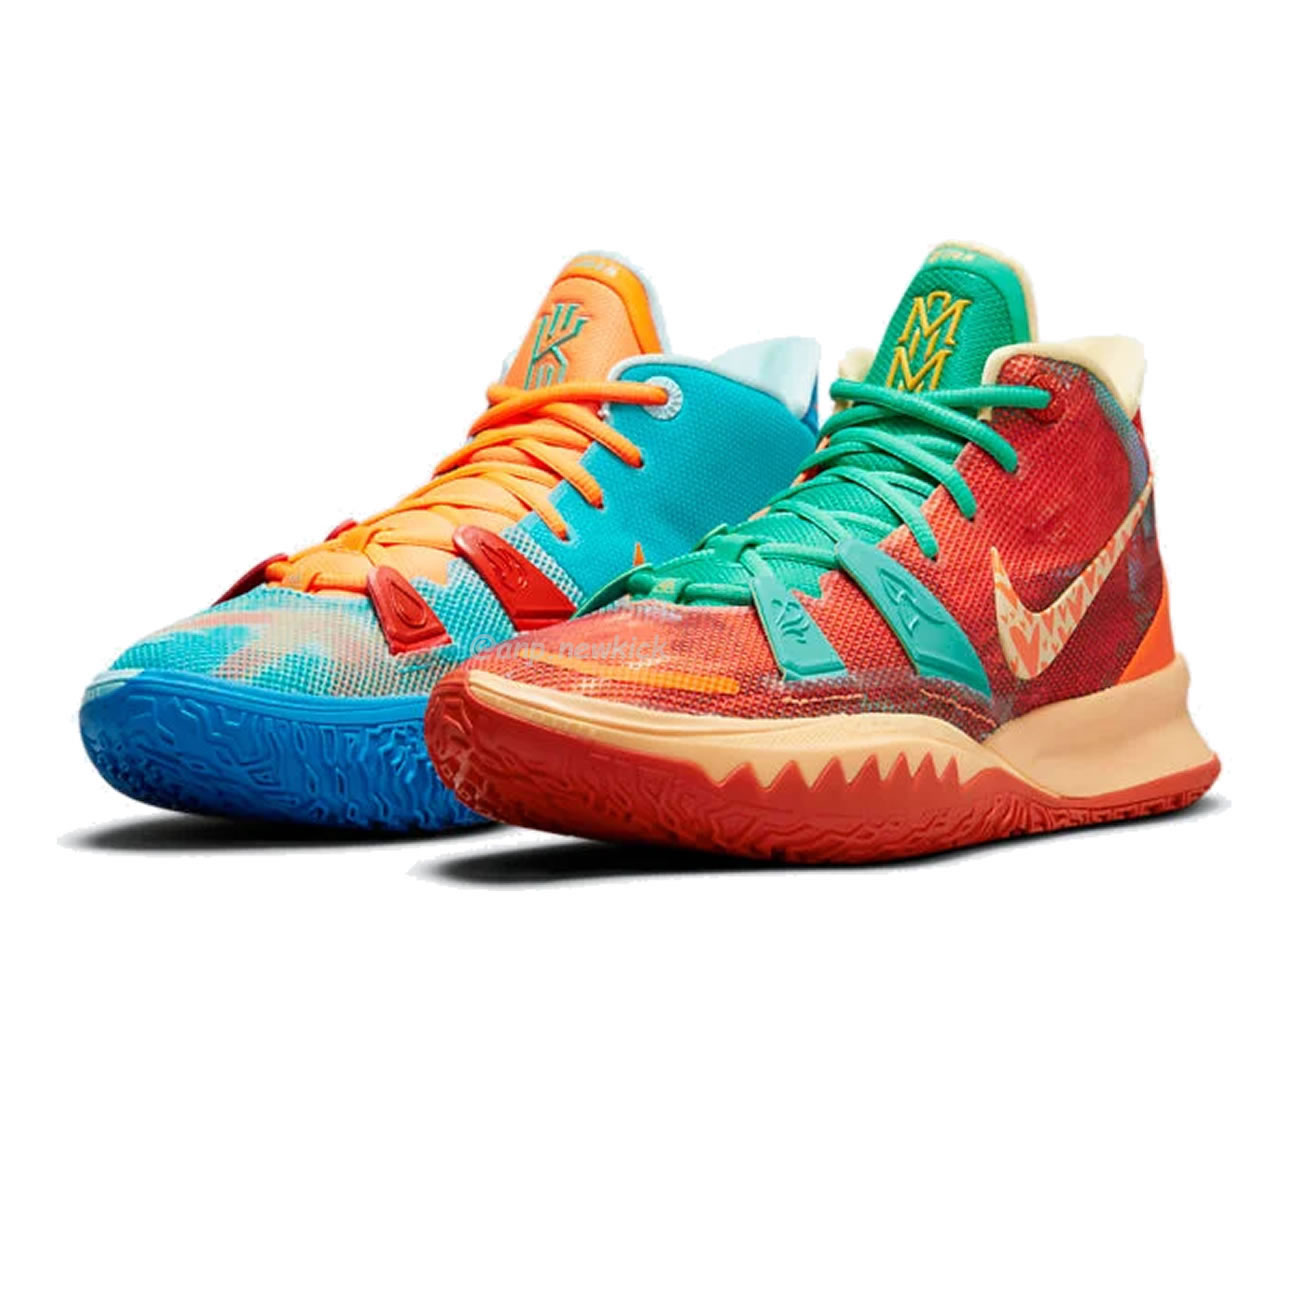 Nike Kyrie 7 Sneaker Room Fire And Water Do5360 900 (7) - newkick.org